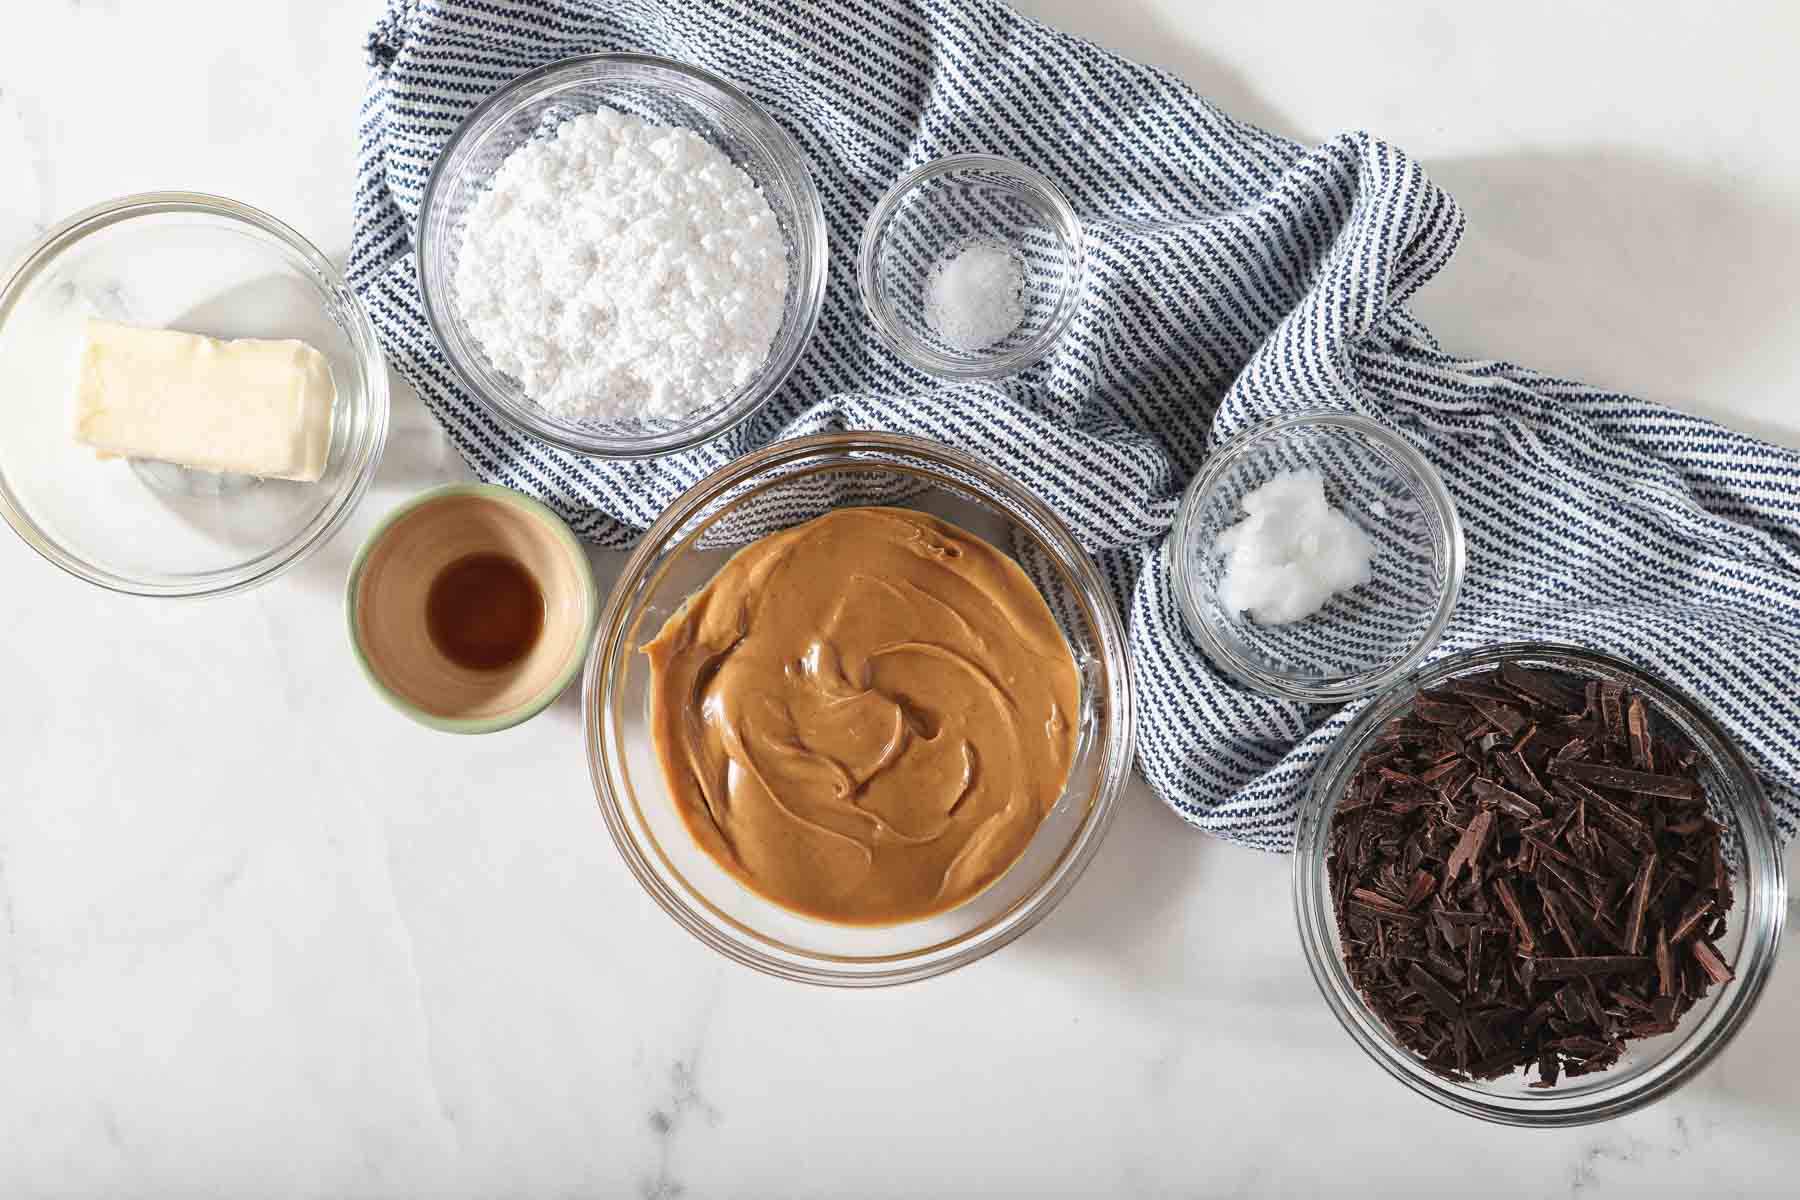 Ingredients for peanut butter truffles on white table.